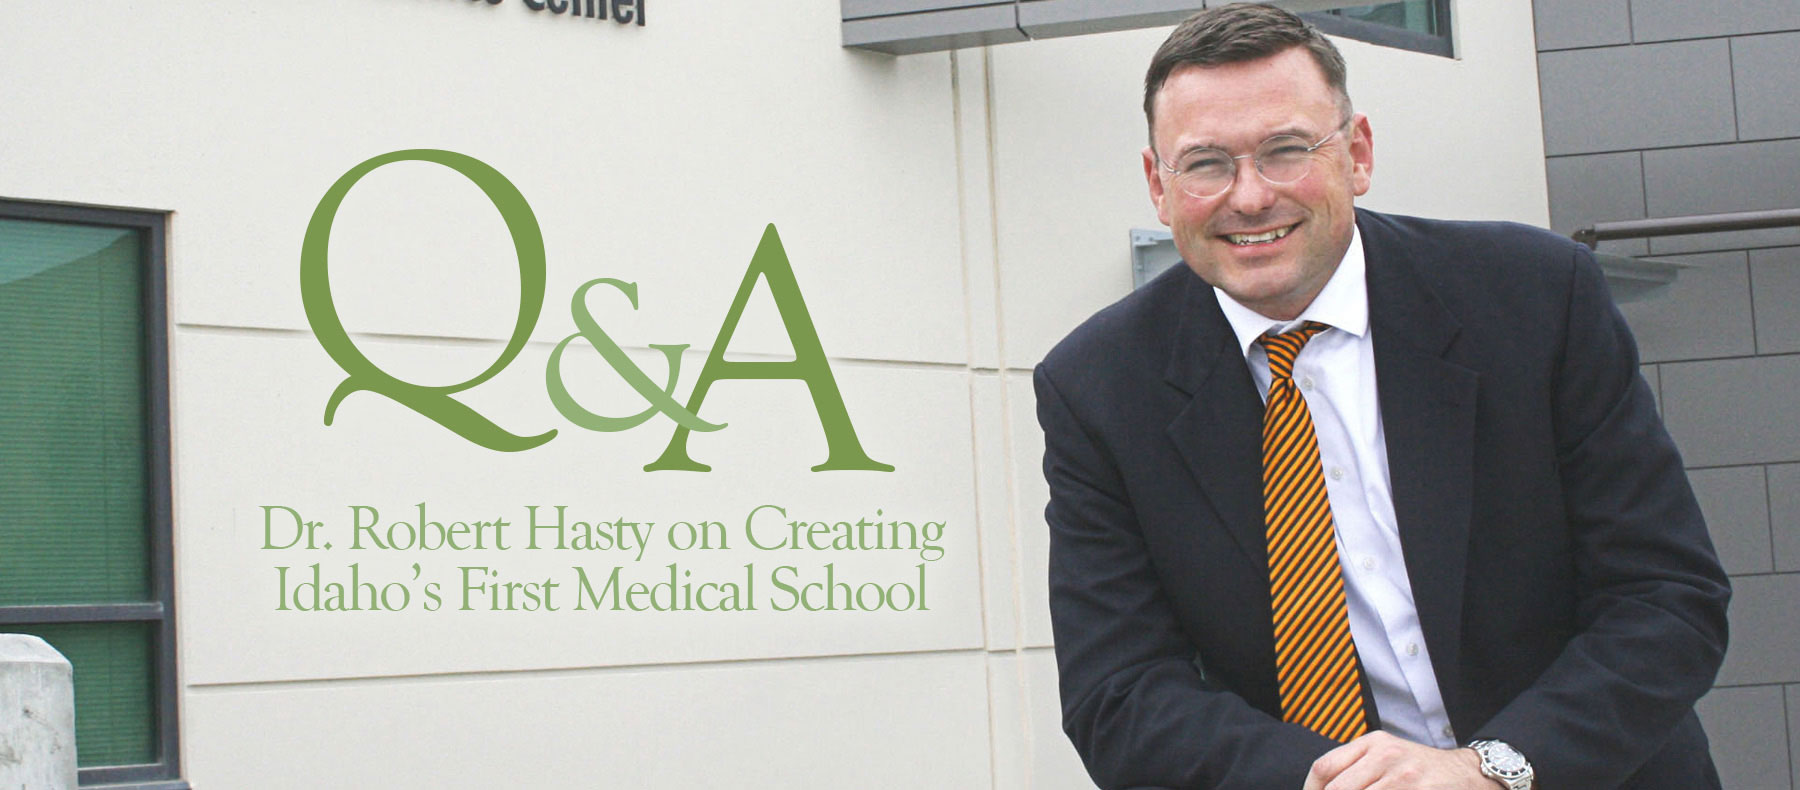 Dr. Robert Hasty on Creating Idaho’s First Medical School